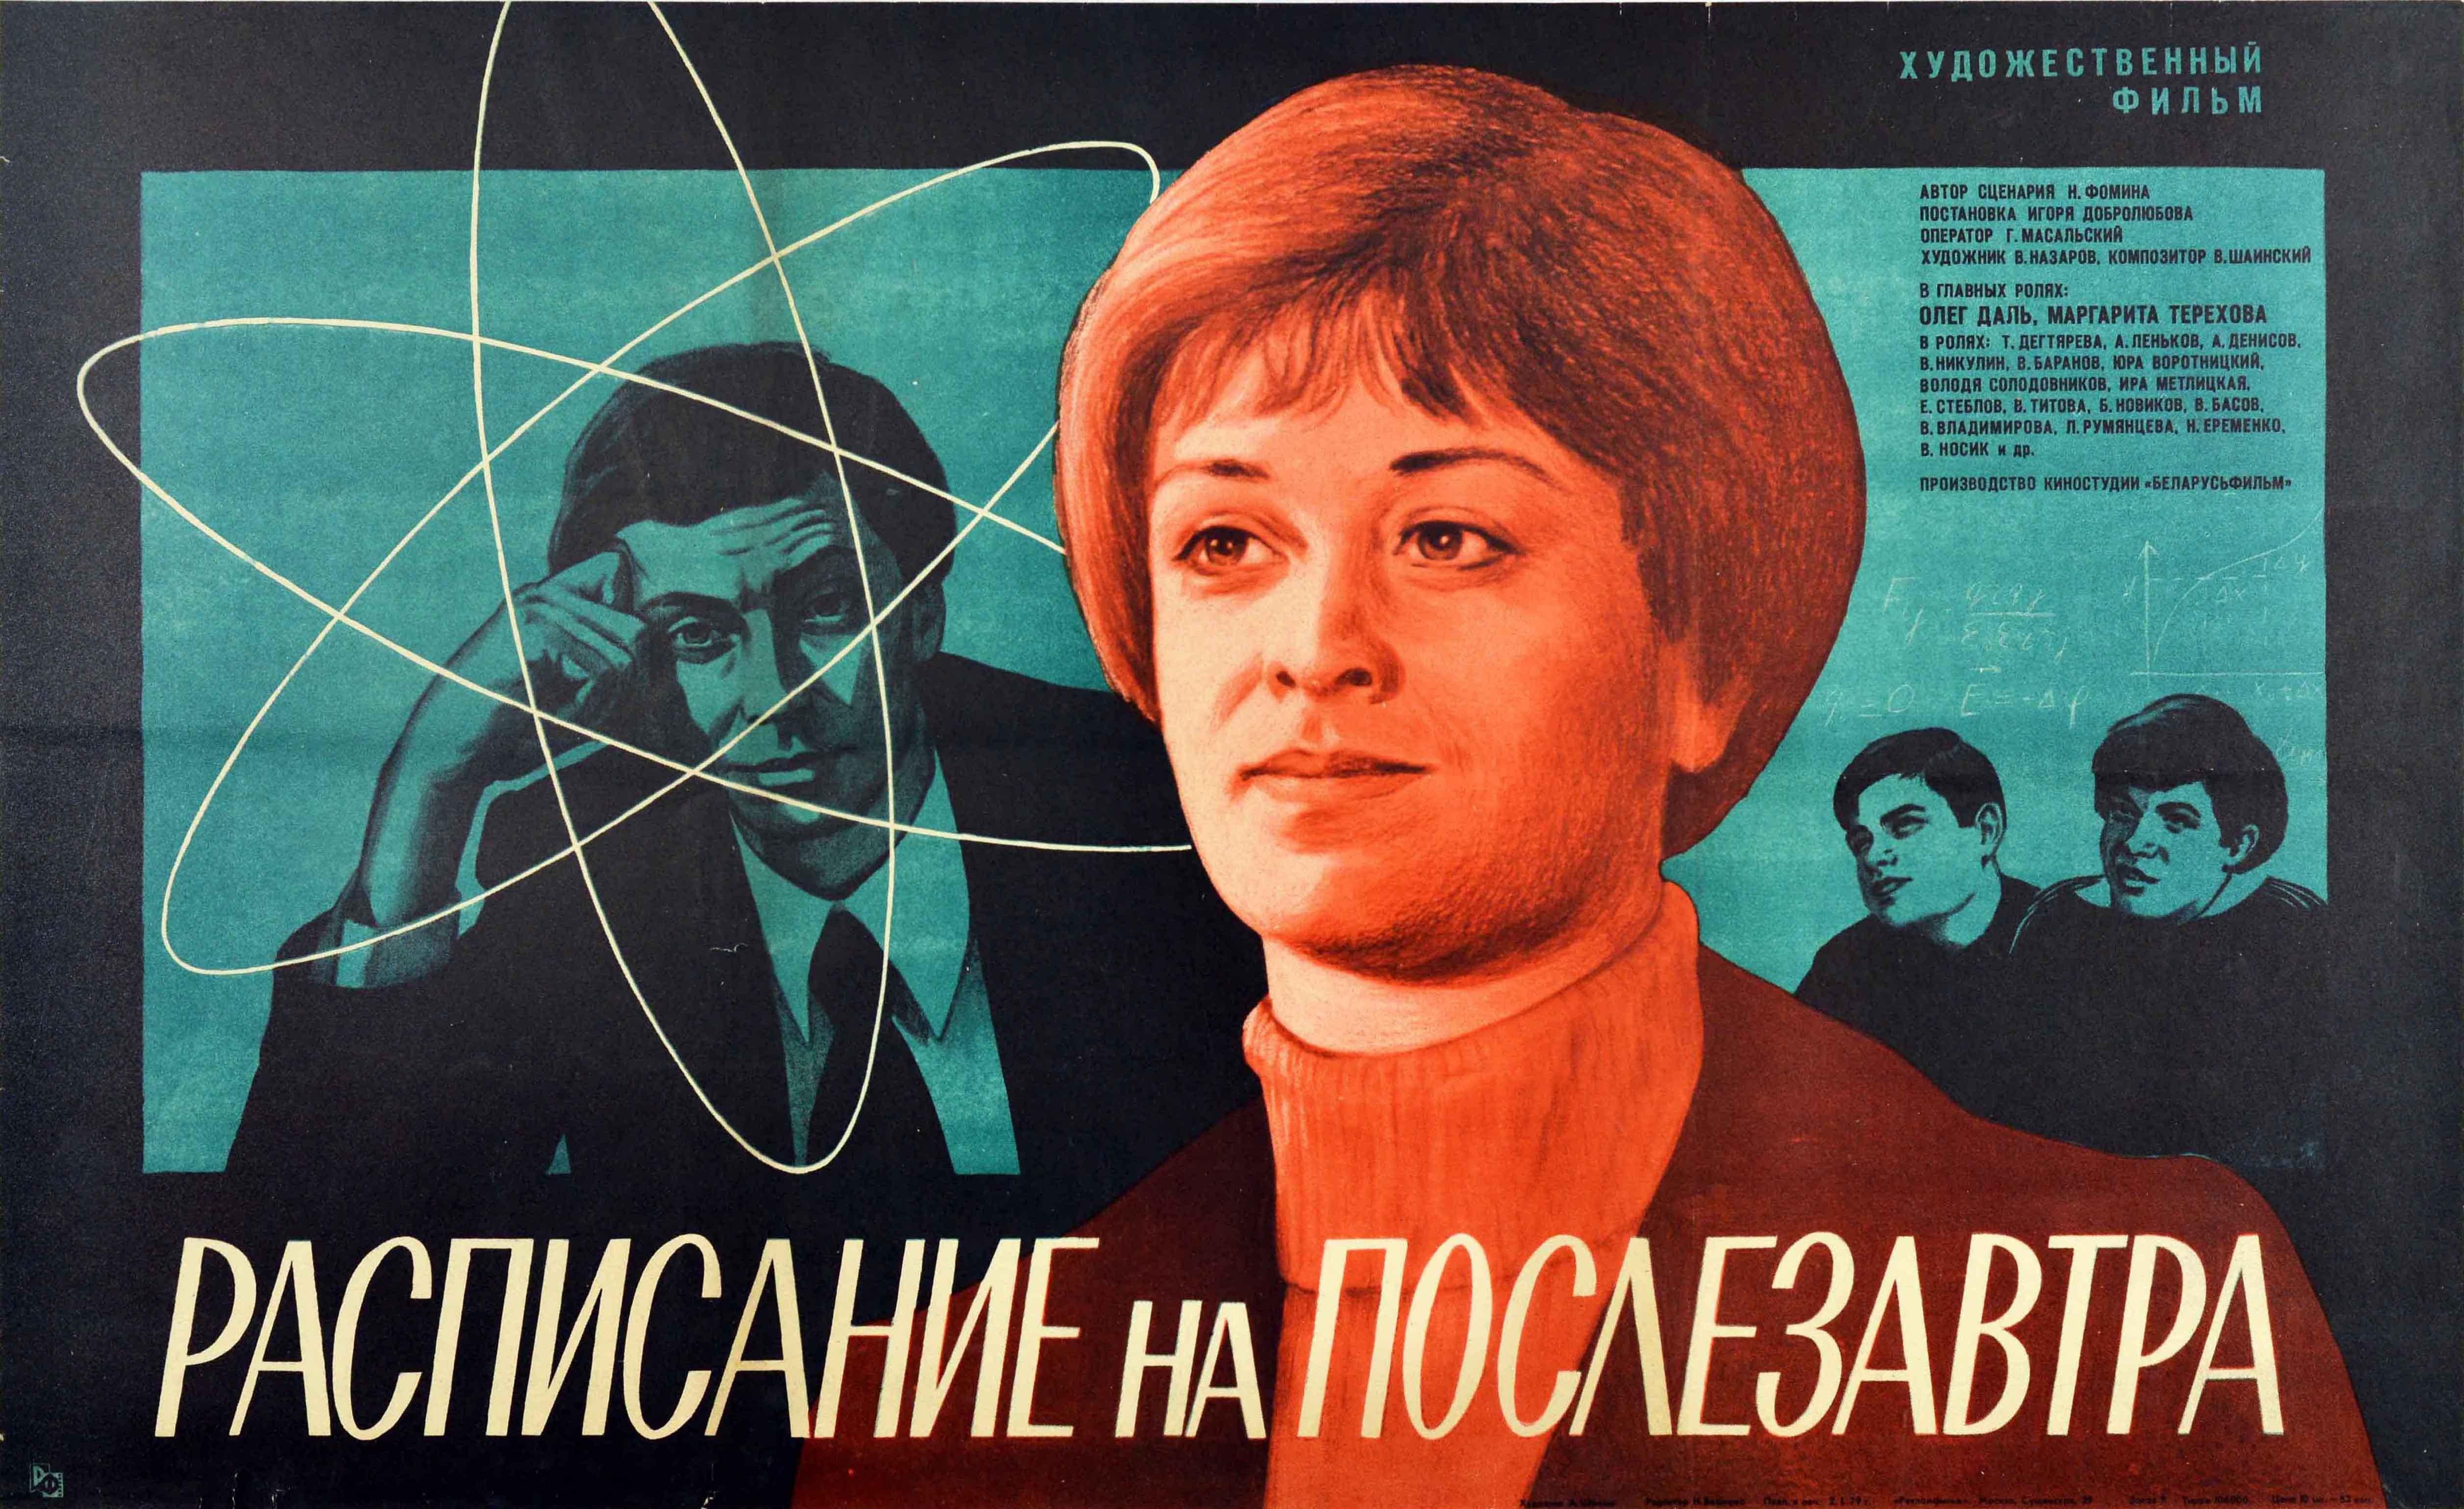 Original vintage Soviet film poster for drama movie about a new Russian literature teacher at a physics and mathematics school - ?????????? ?? ??????????? / Schedule for the Day After Tomorrow - directed by Igor Dobrolyubov and starring Oleg Dal and